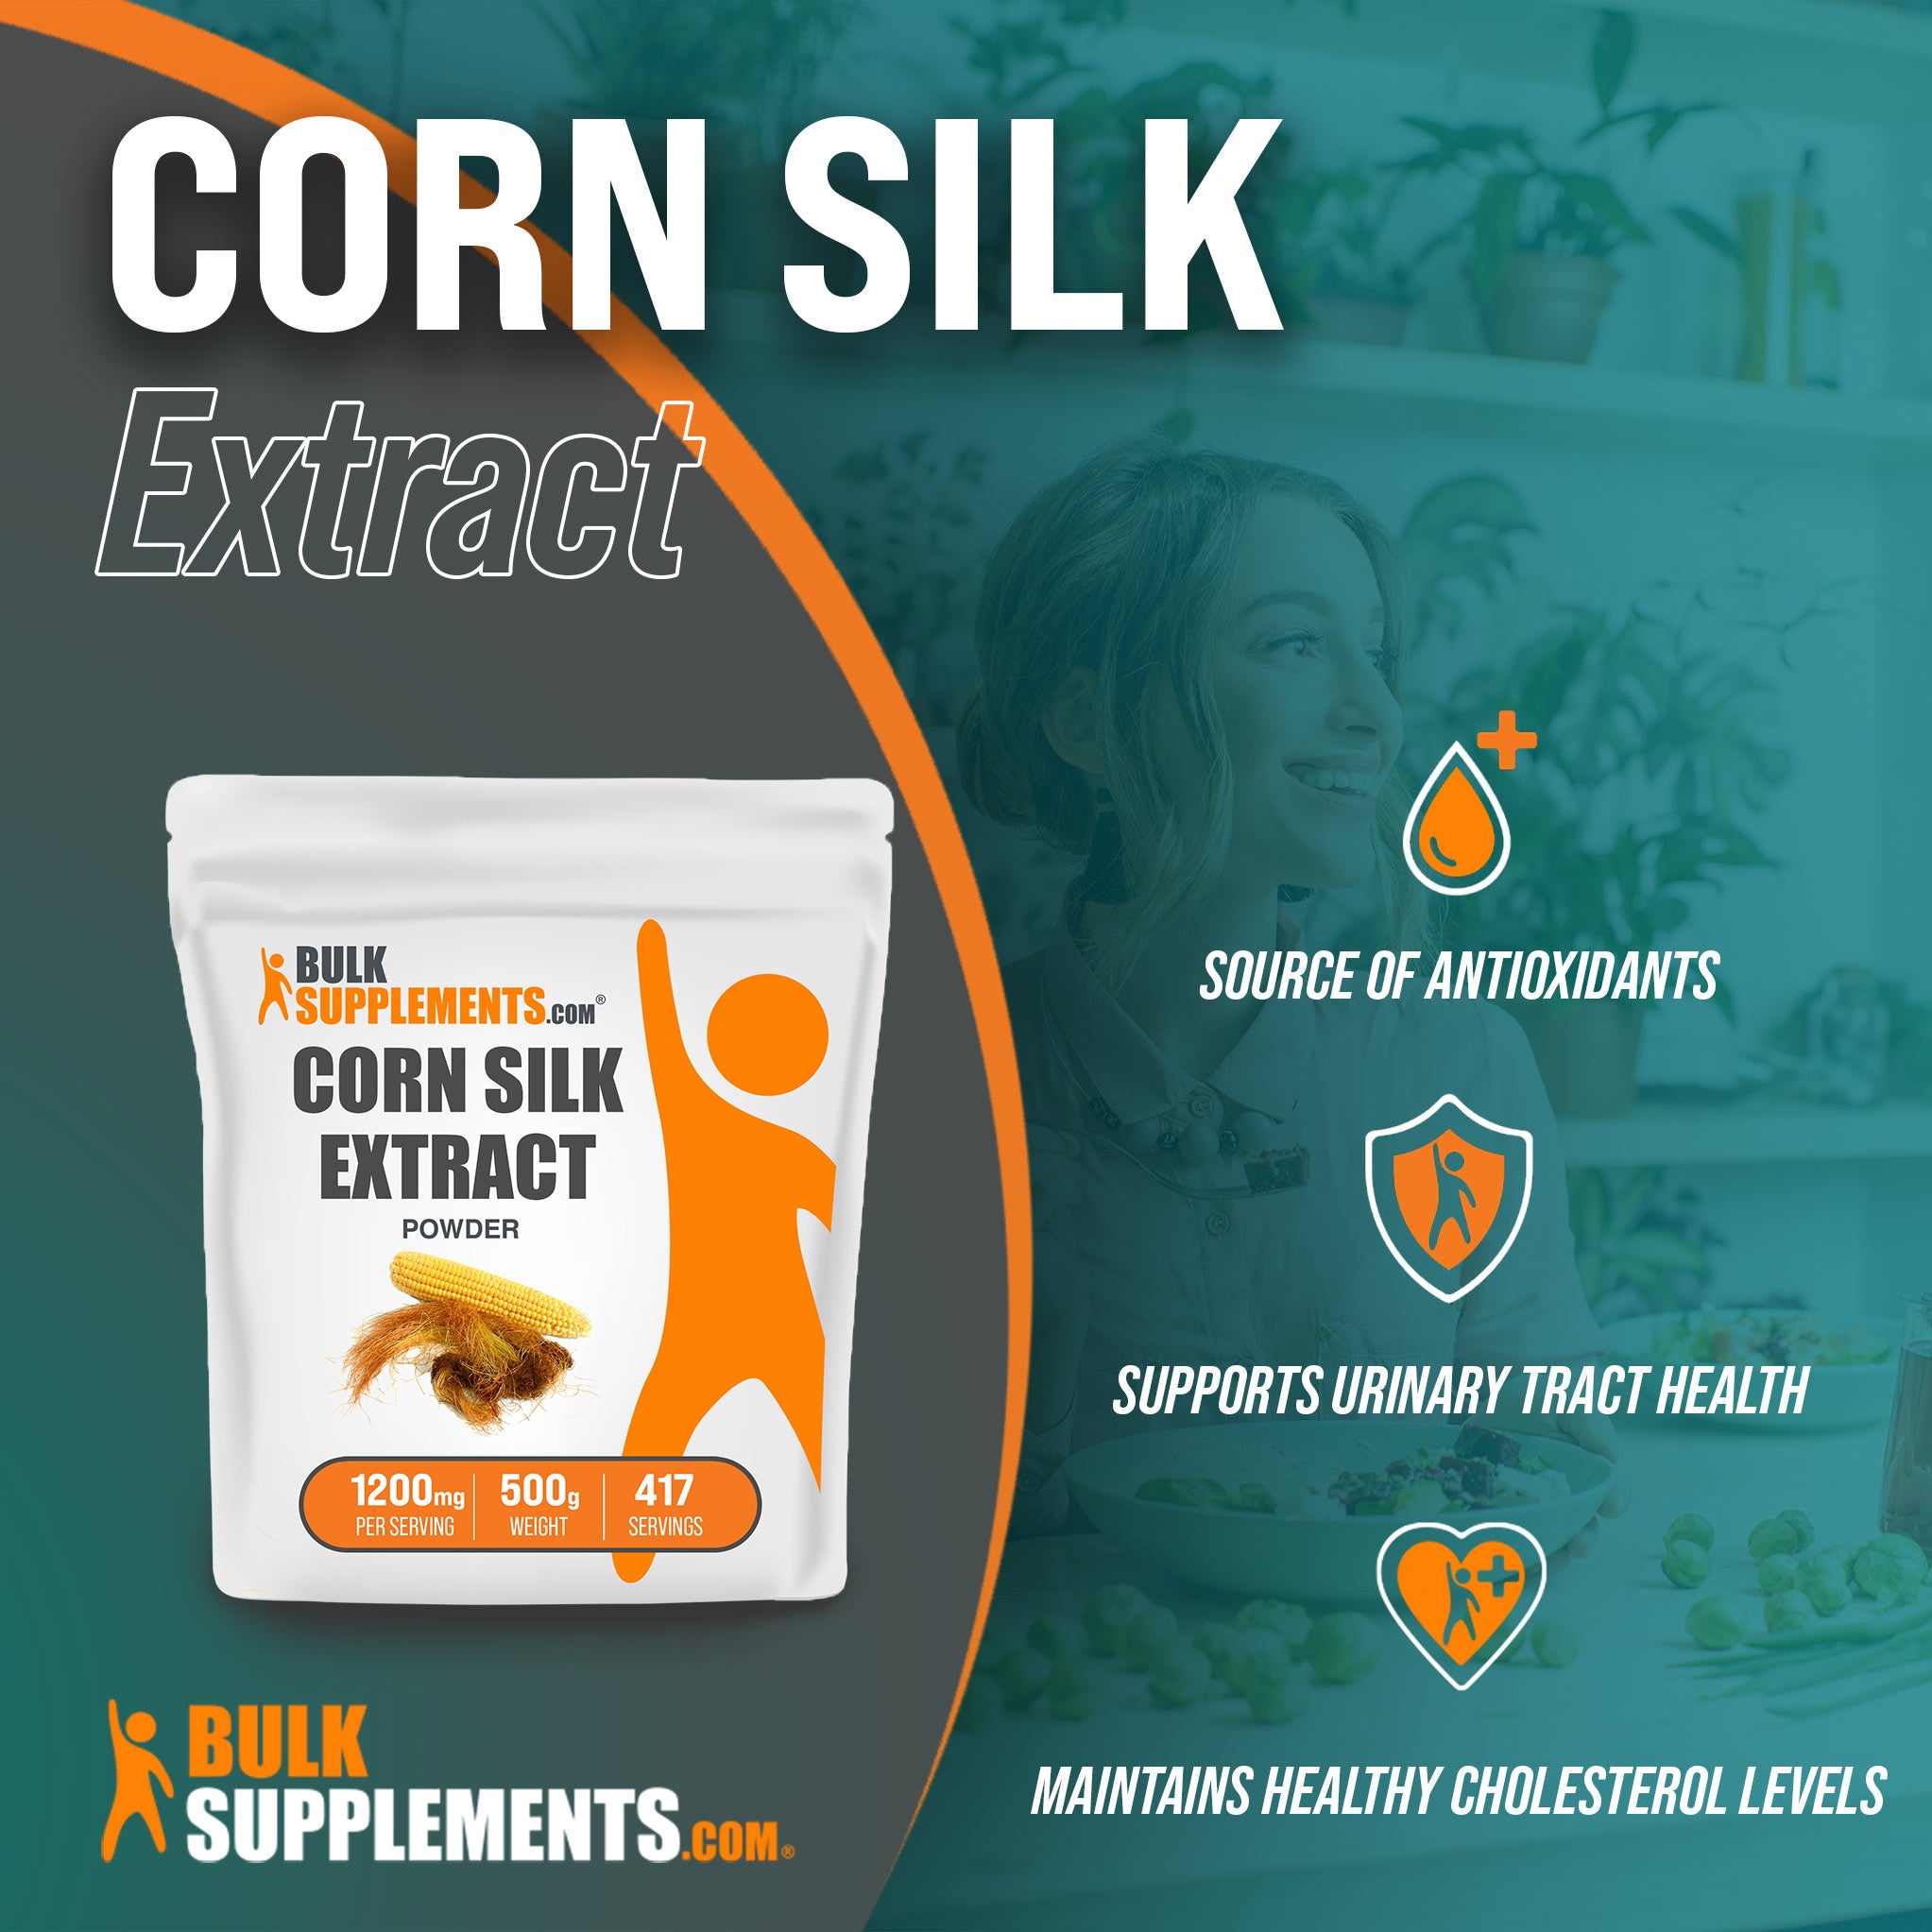 Benefits of Corn Silk Extract; source of antioxidants, supports urinary tract health, maintains healthy cholesterol levels